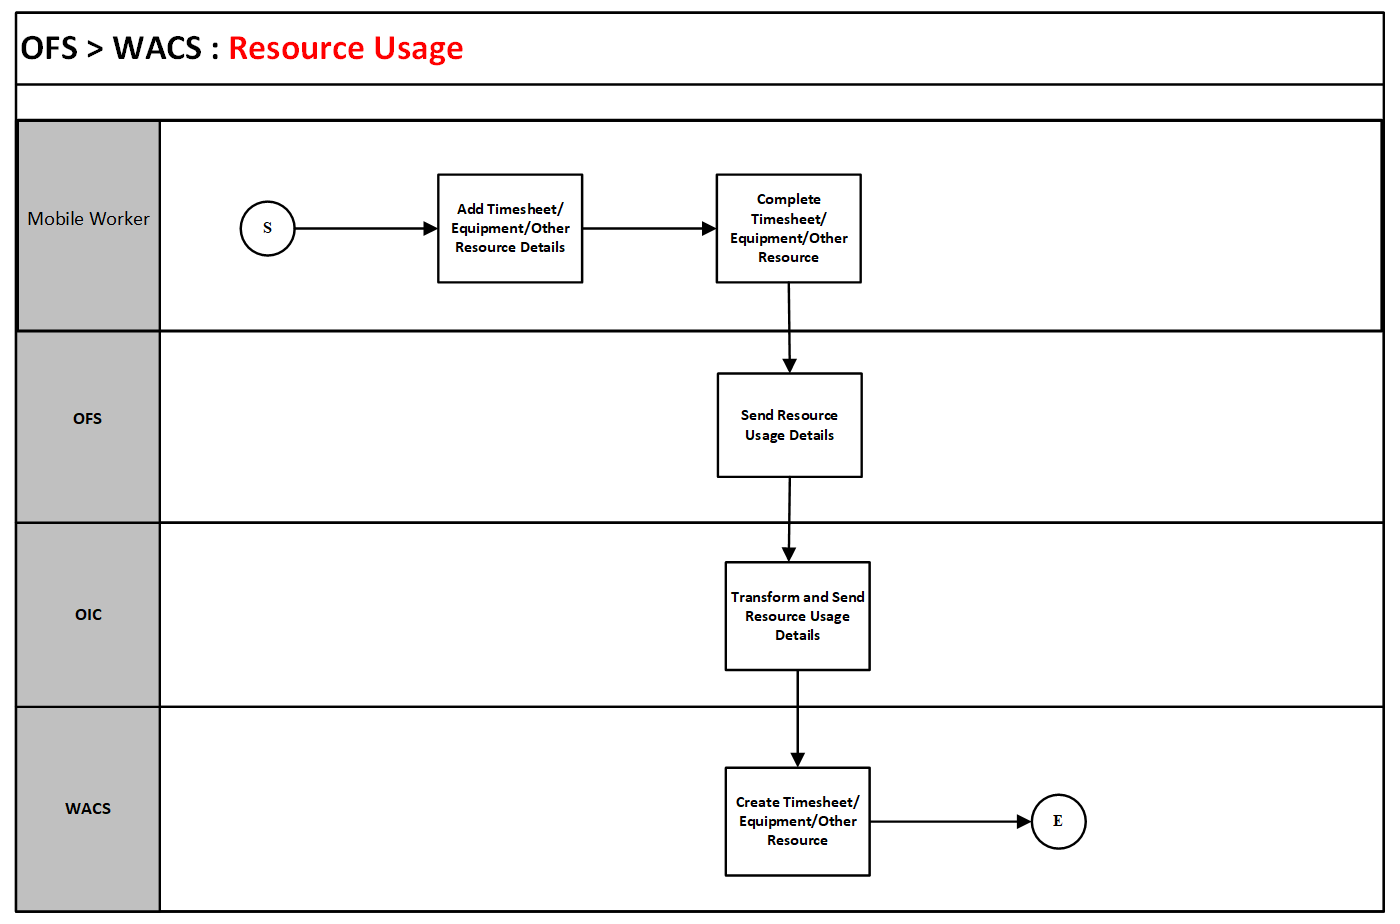 A graphical representation of the Resource Usage integration process